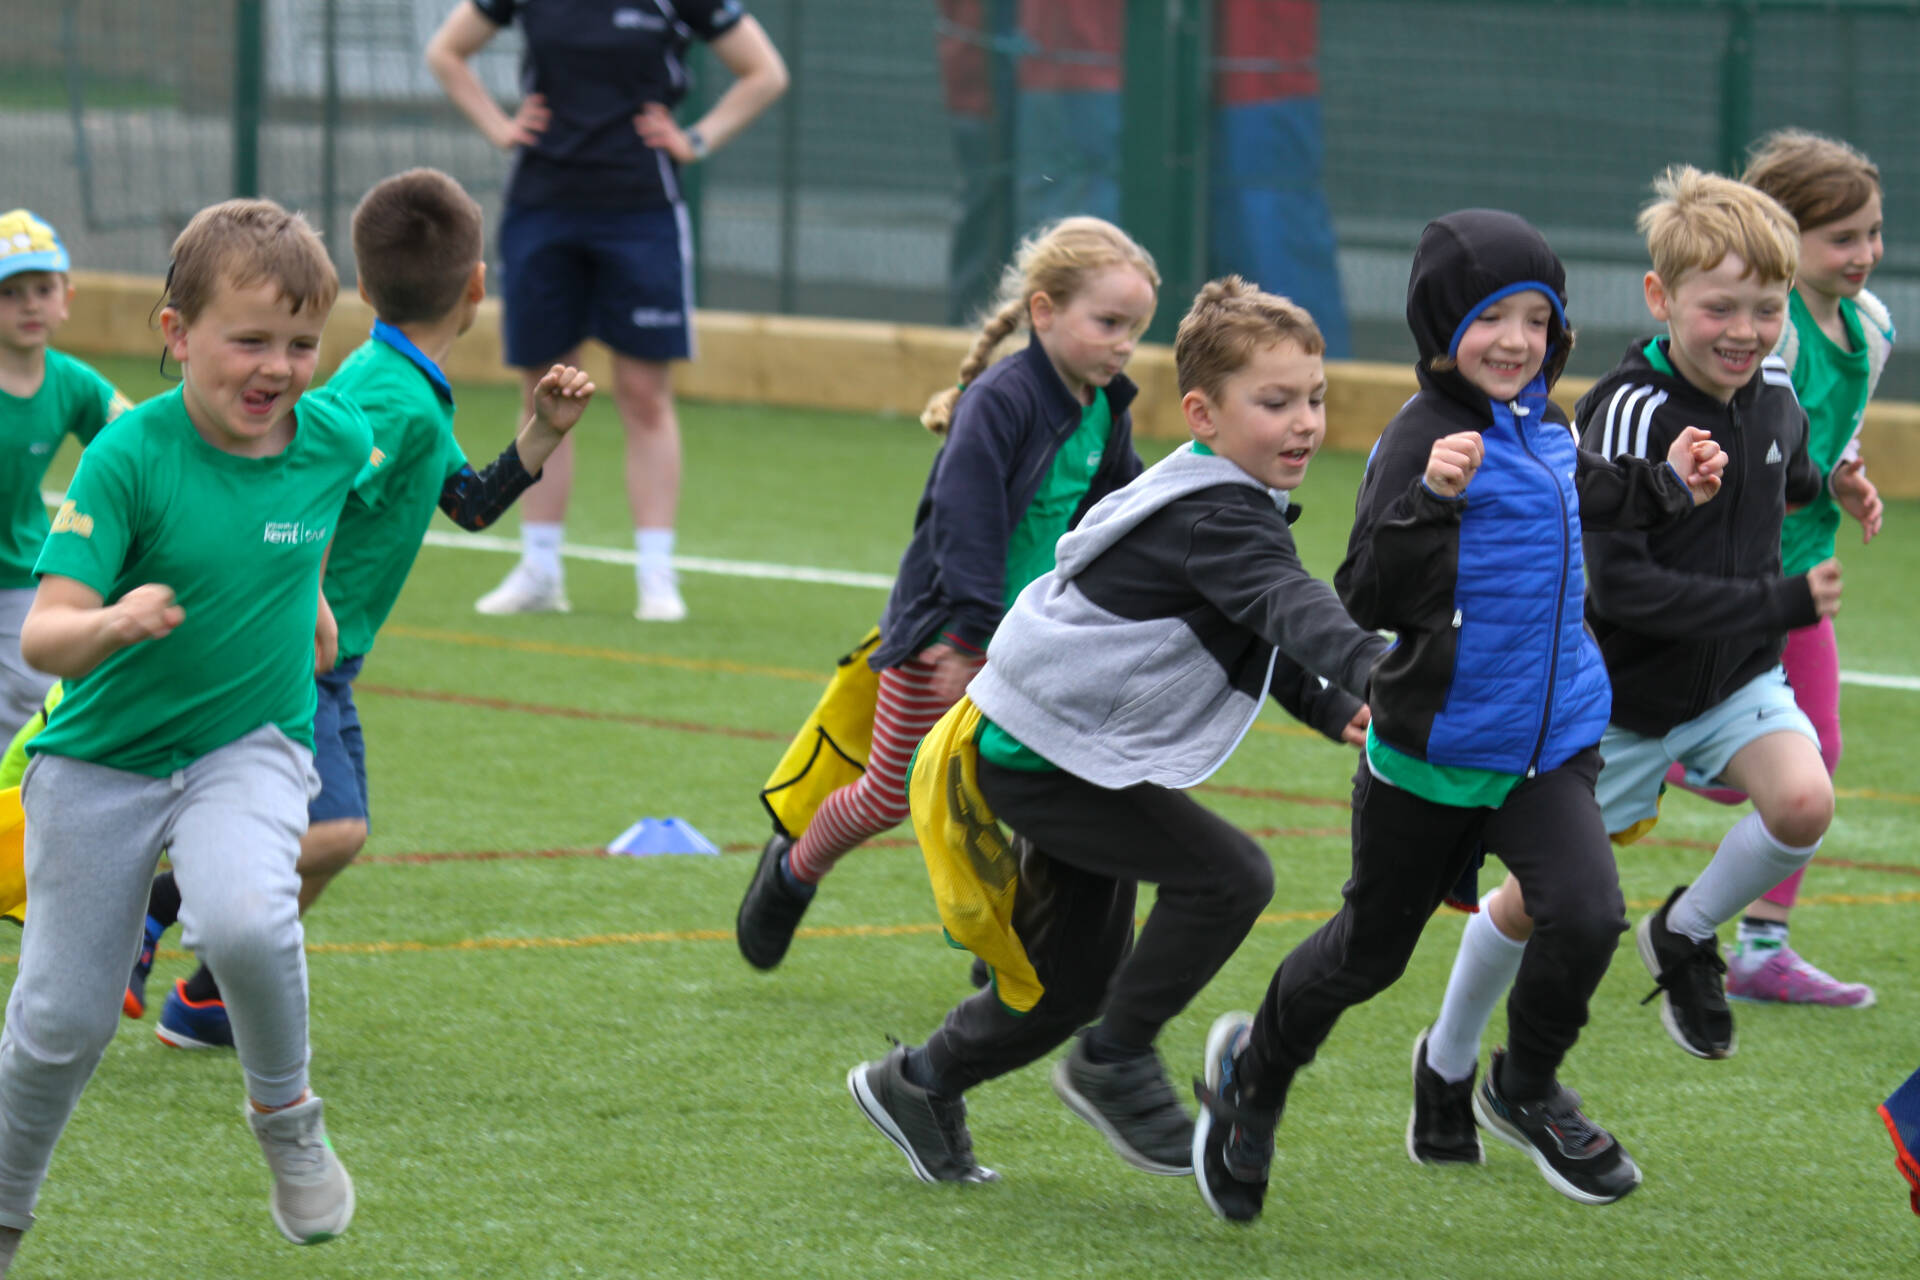 Children chasing each other on artificial pitch playing tag rugby